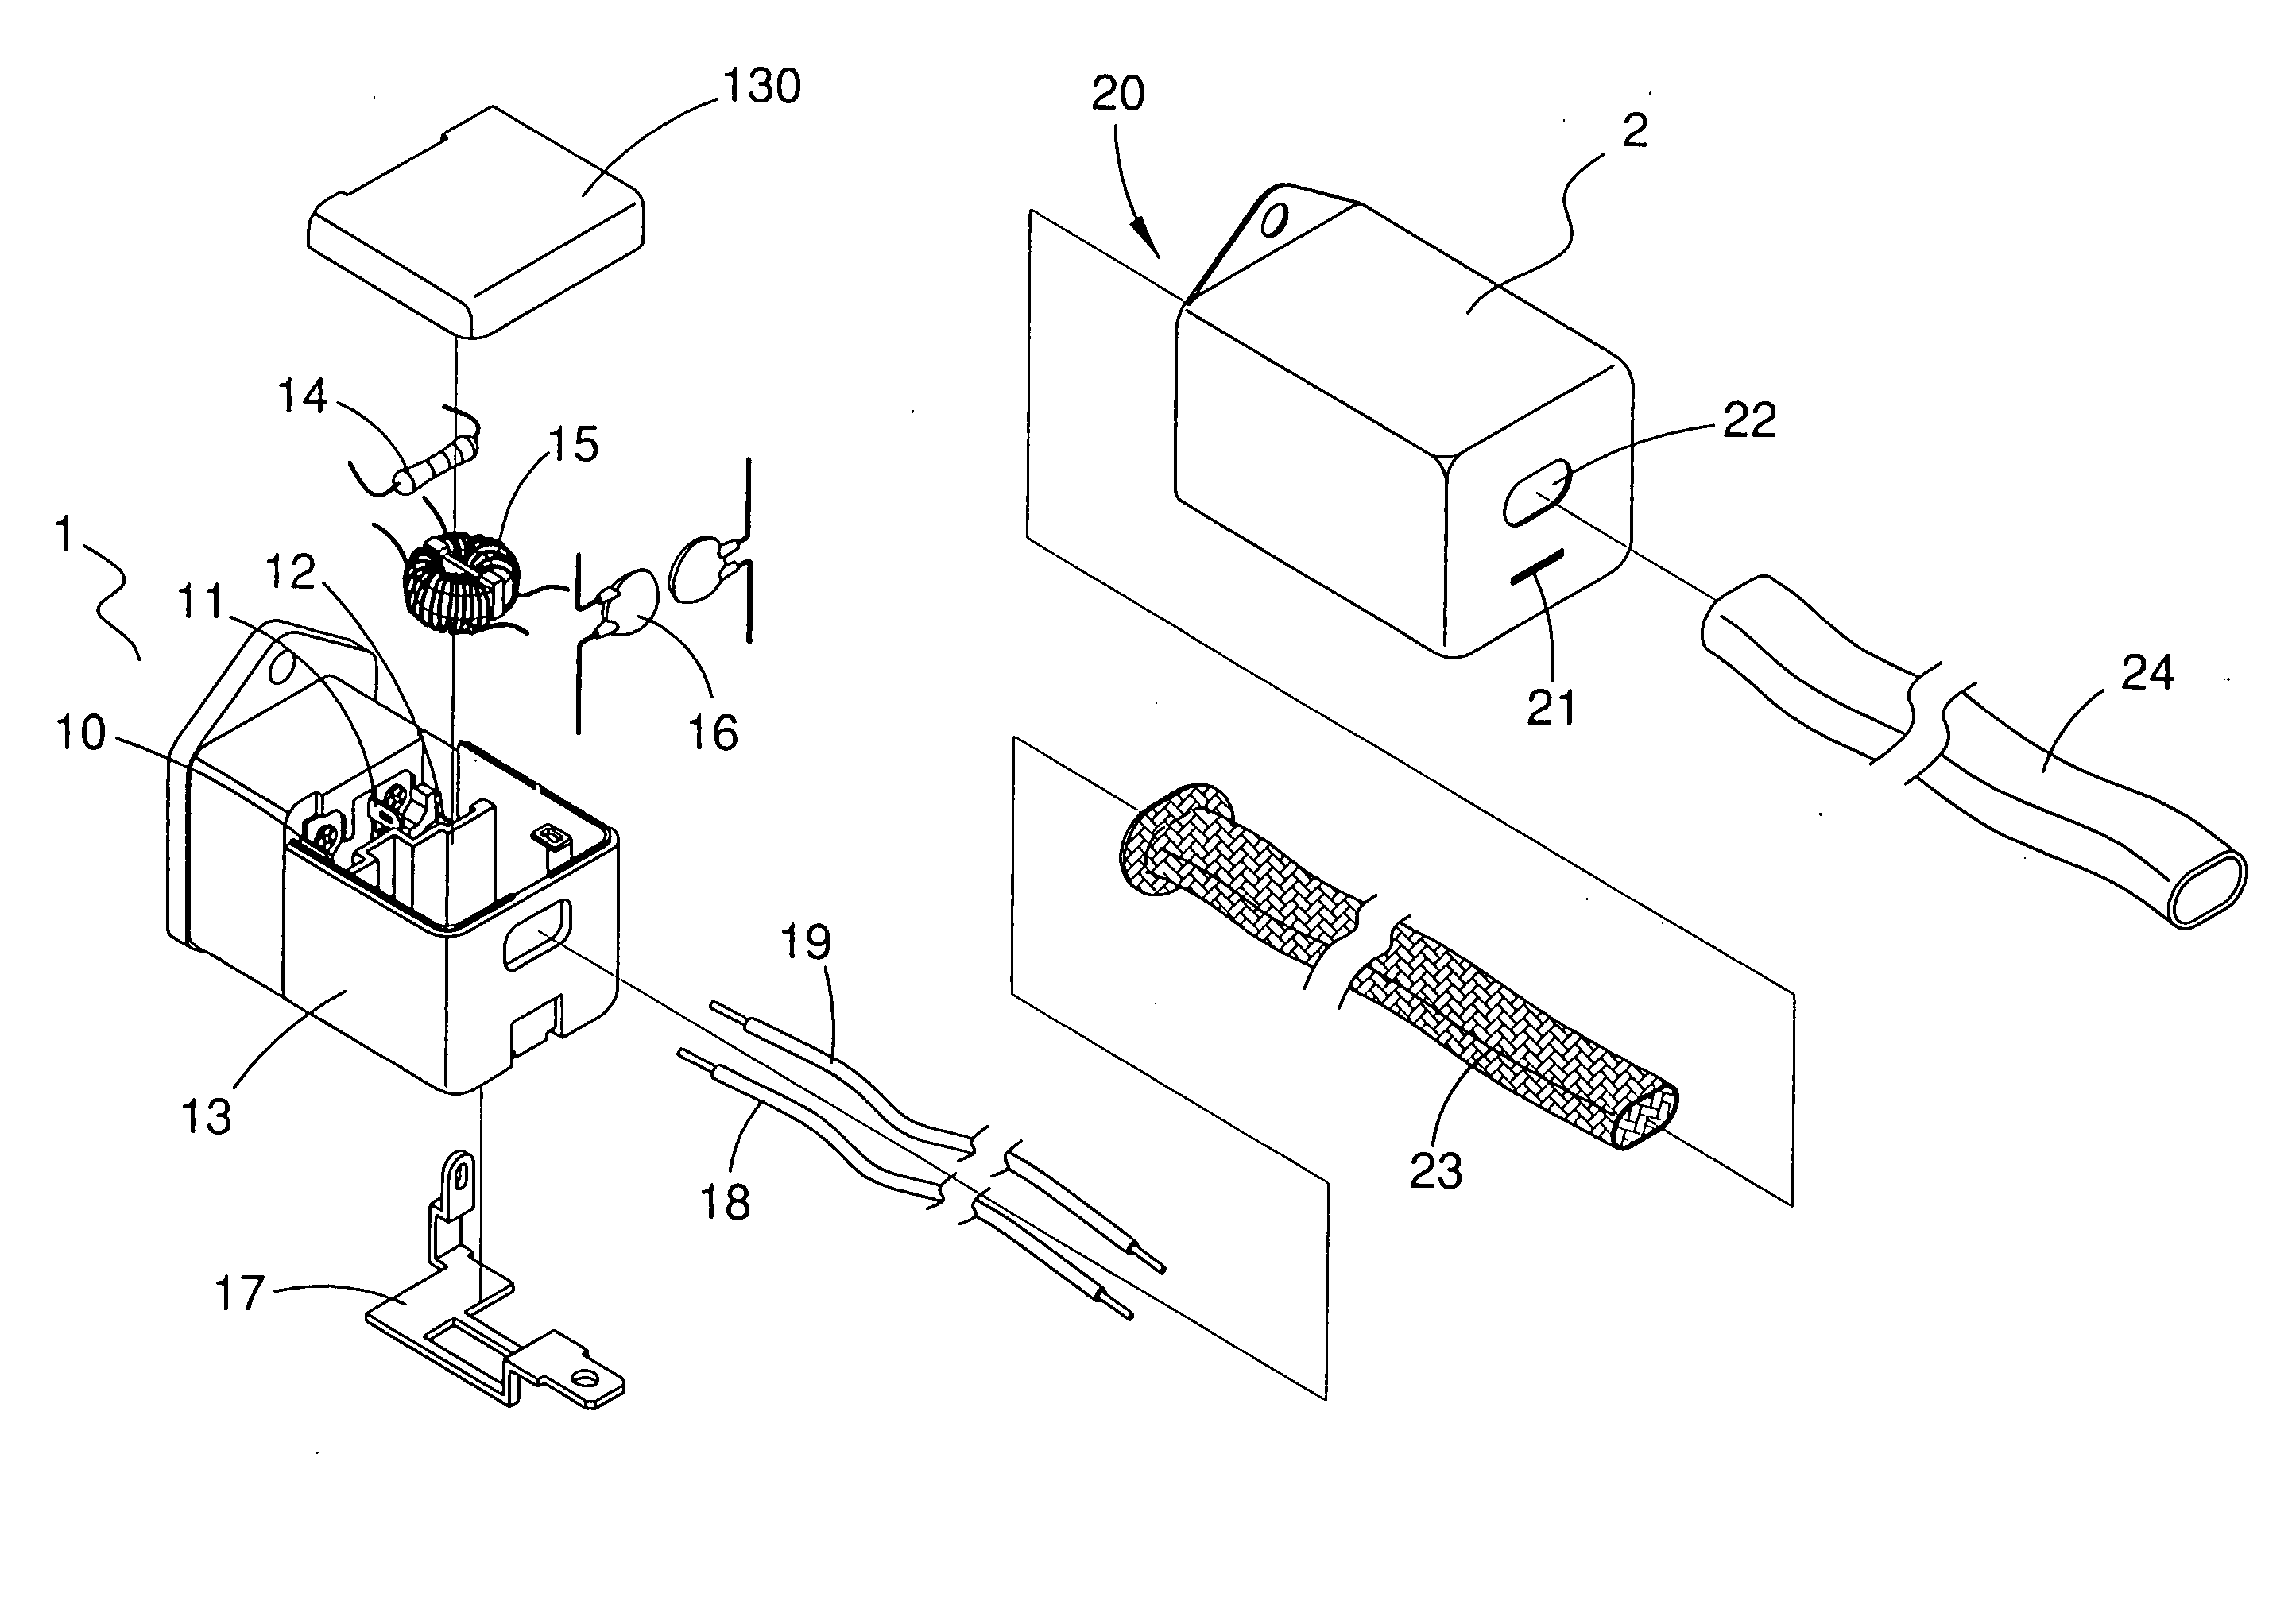 Filter structure and method of fabrication